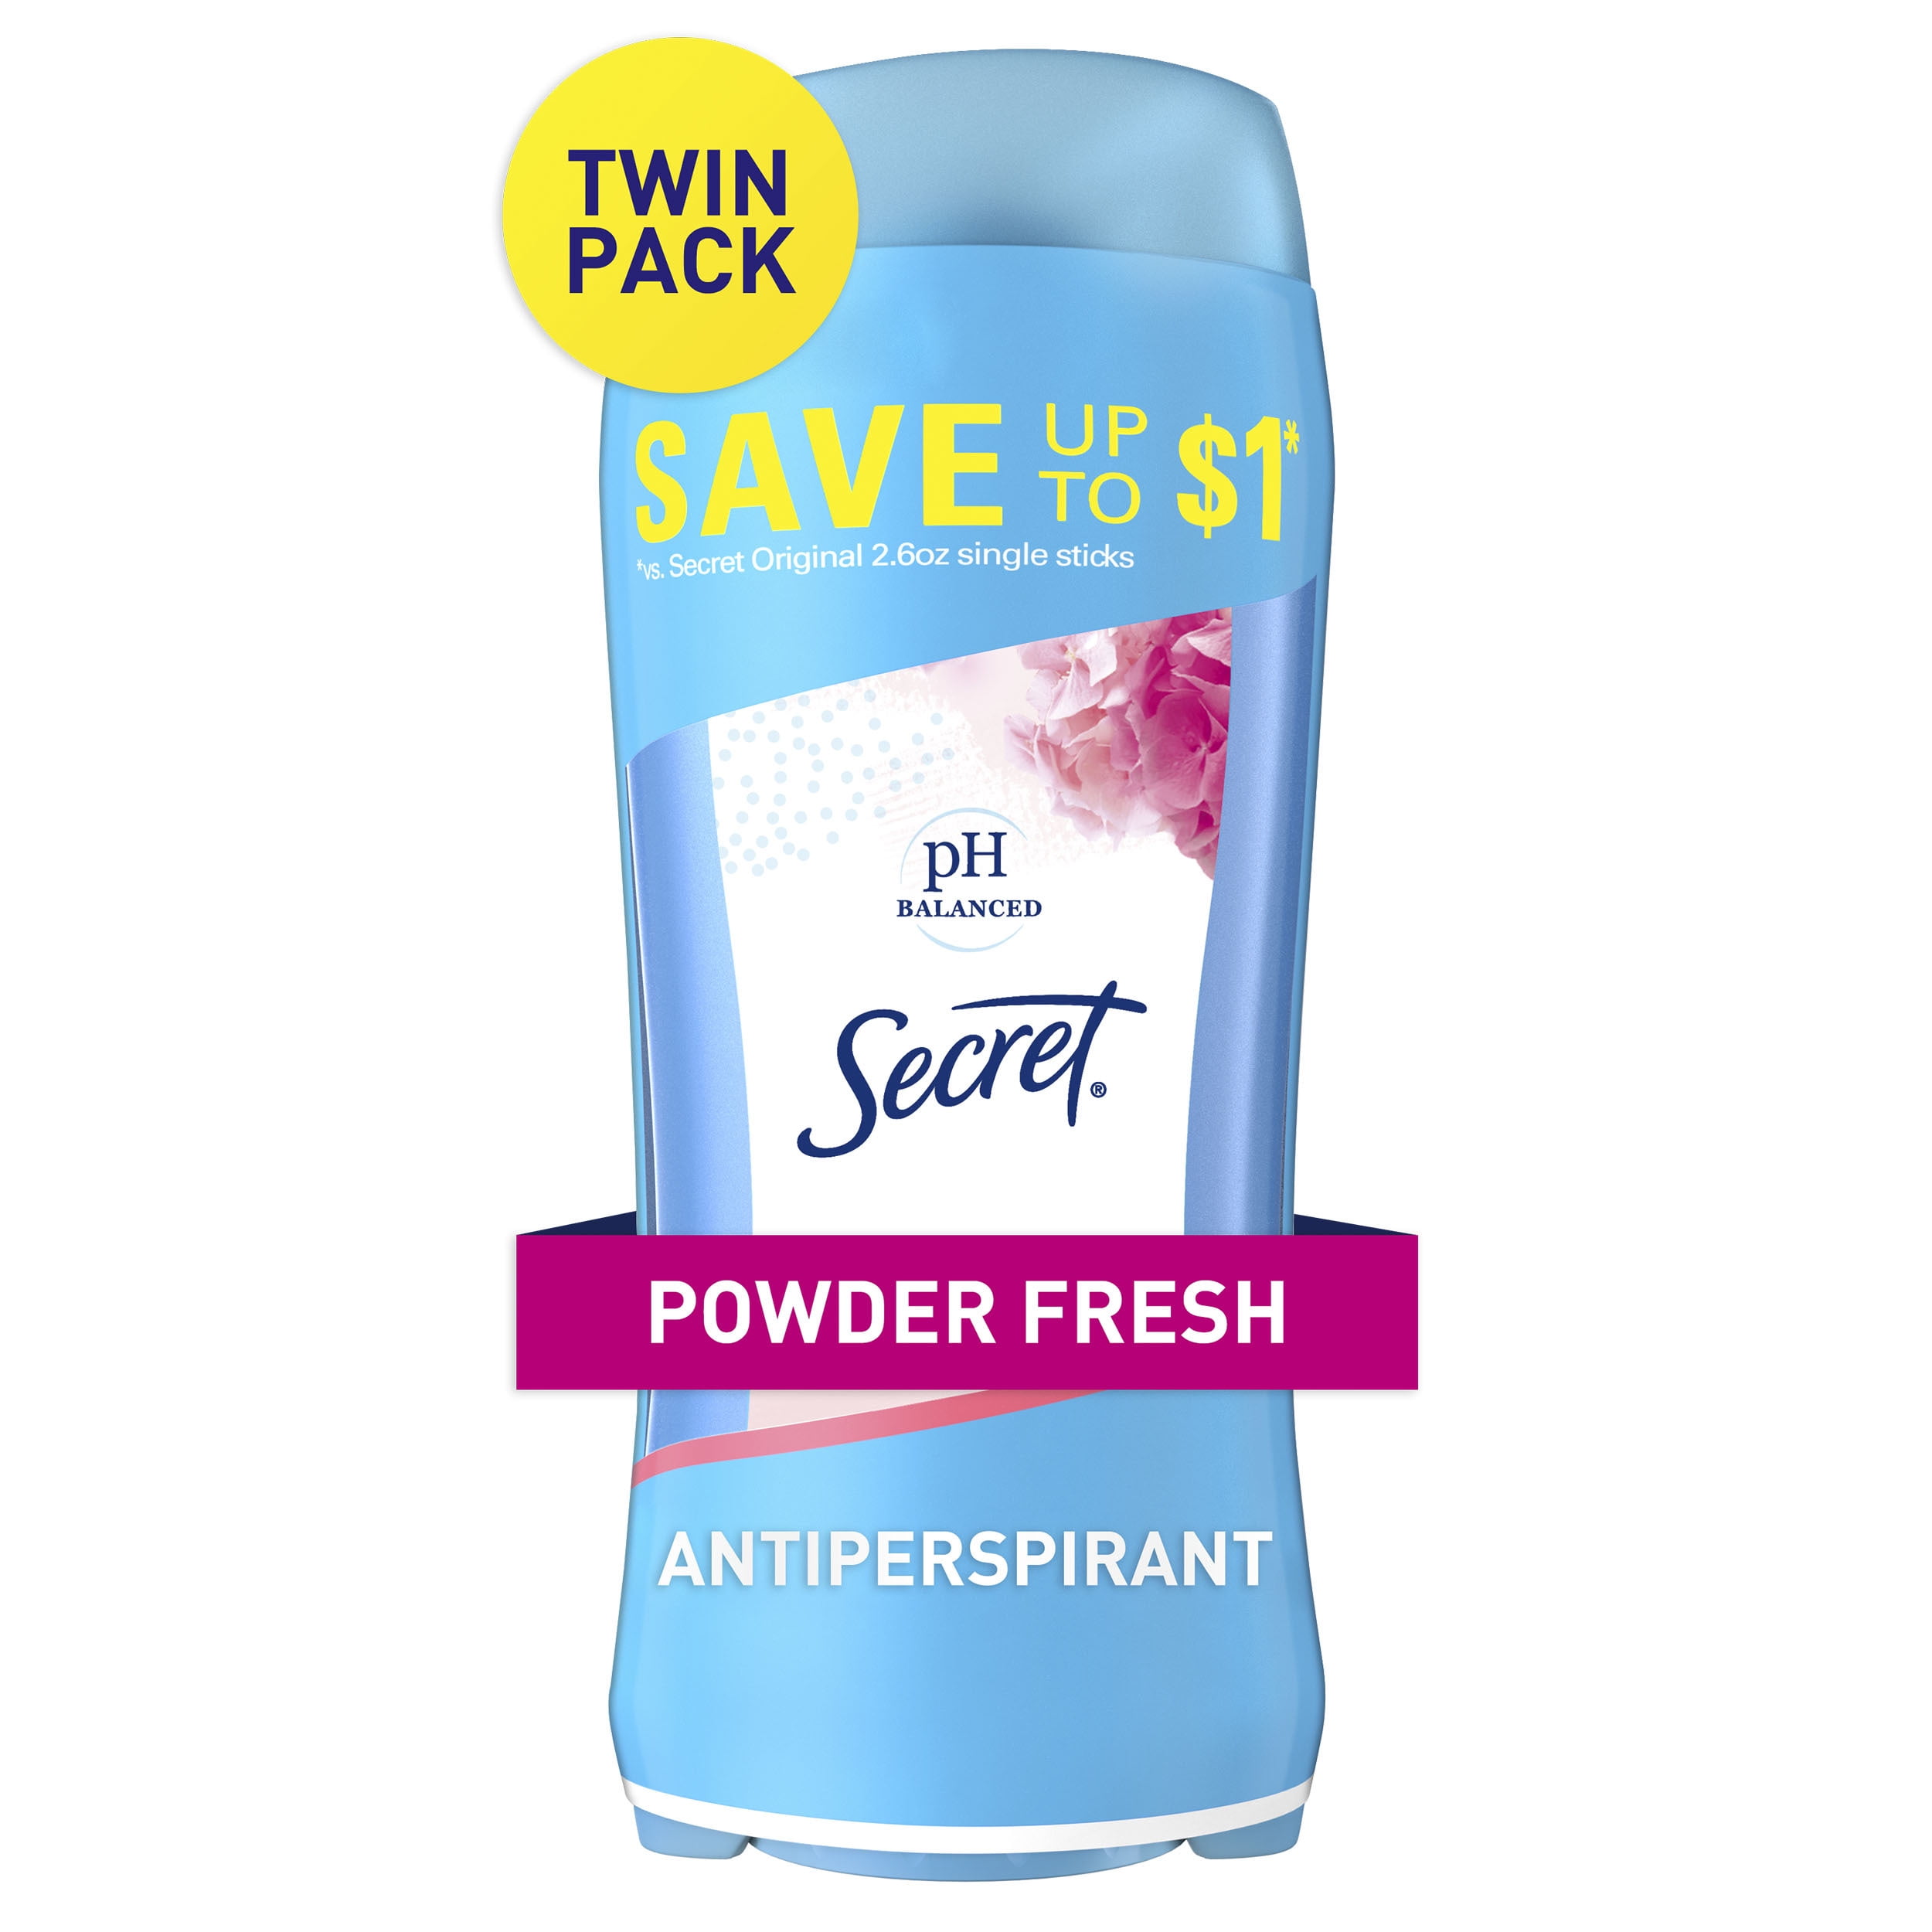 Secret Invisible Solid Antiperspirant and Deodorant, Powder Fresh, Twin Pack, 2.6 oz each